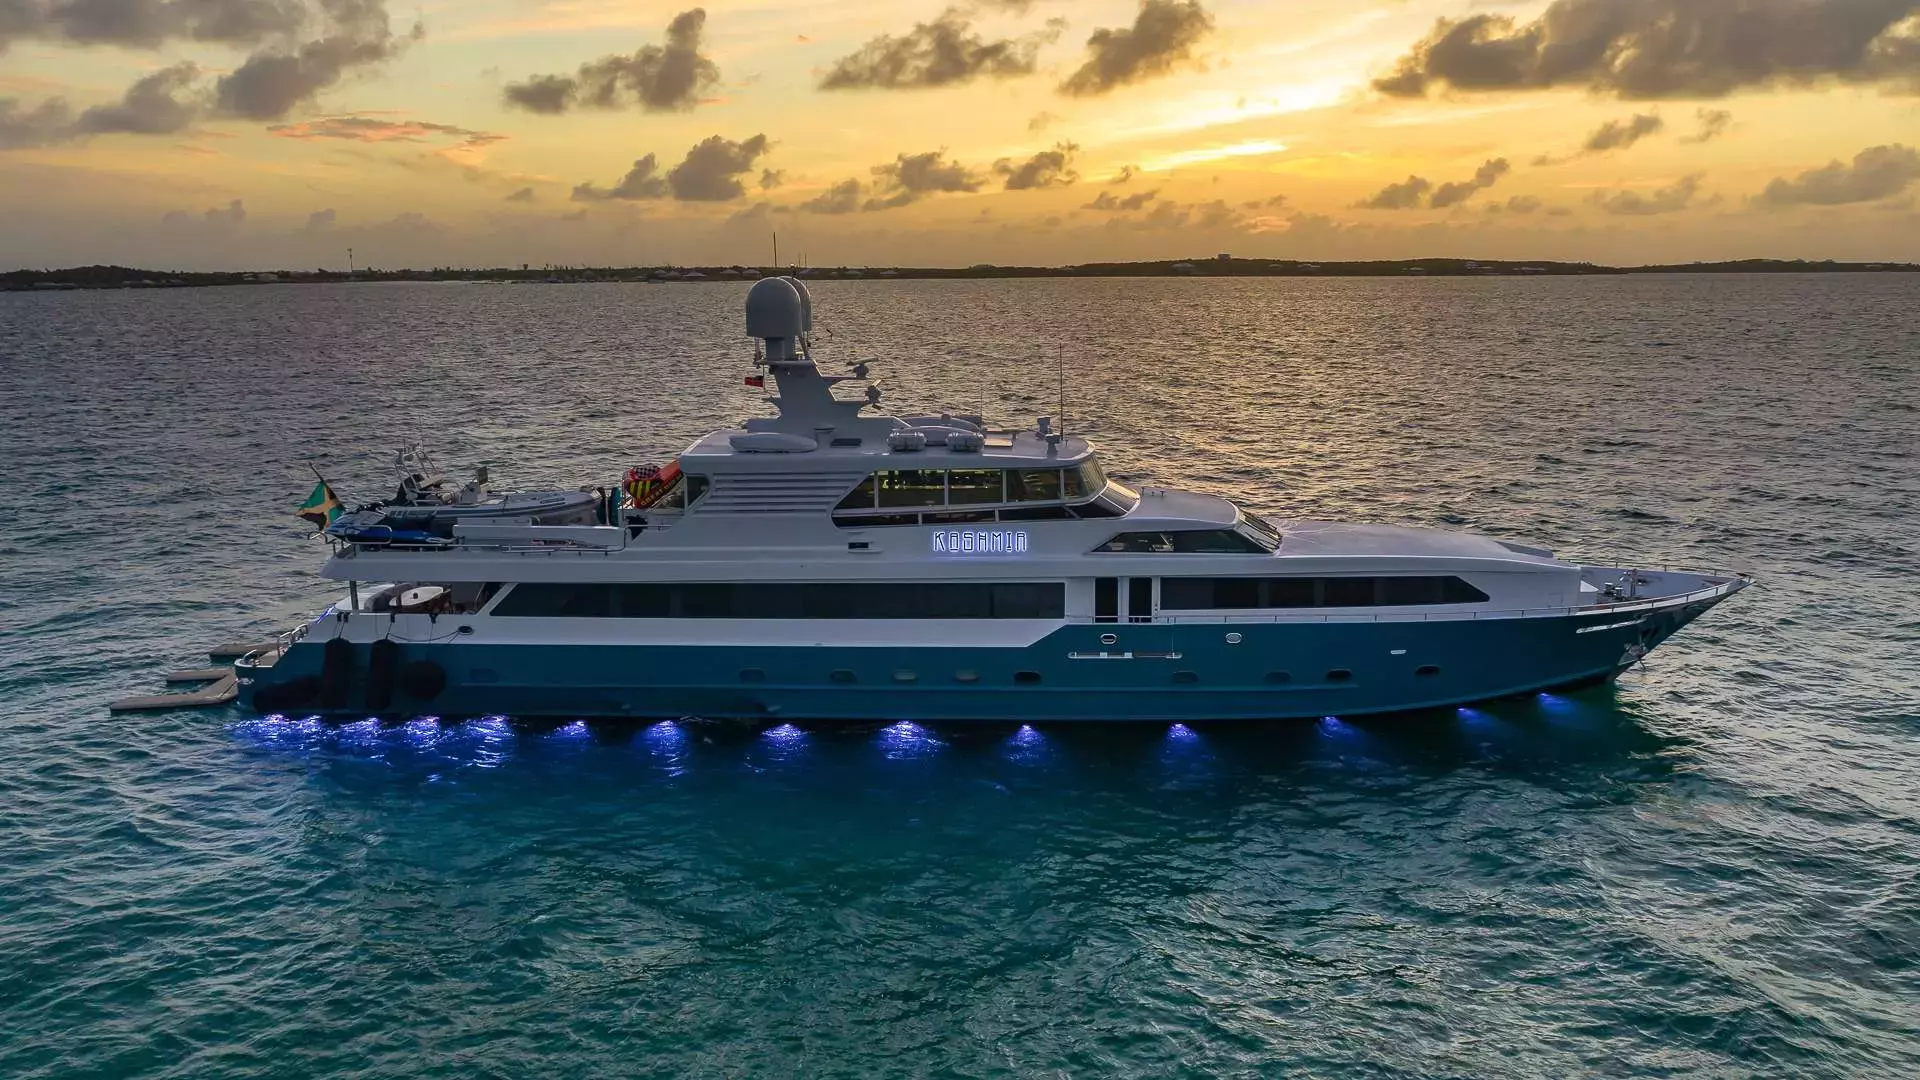 Kashmir by Splendor - Top rates for a Rental of a private Superyacht in Bahamas